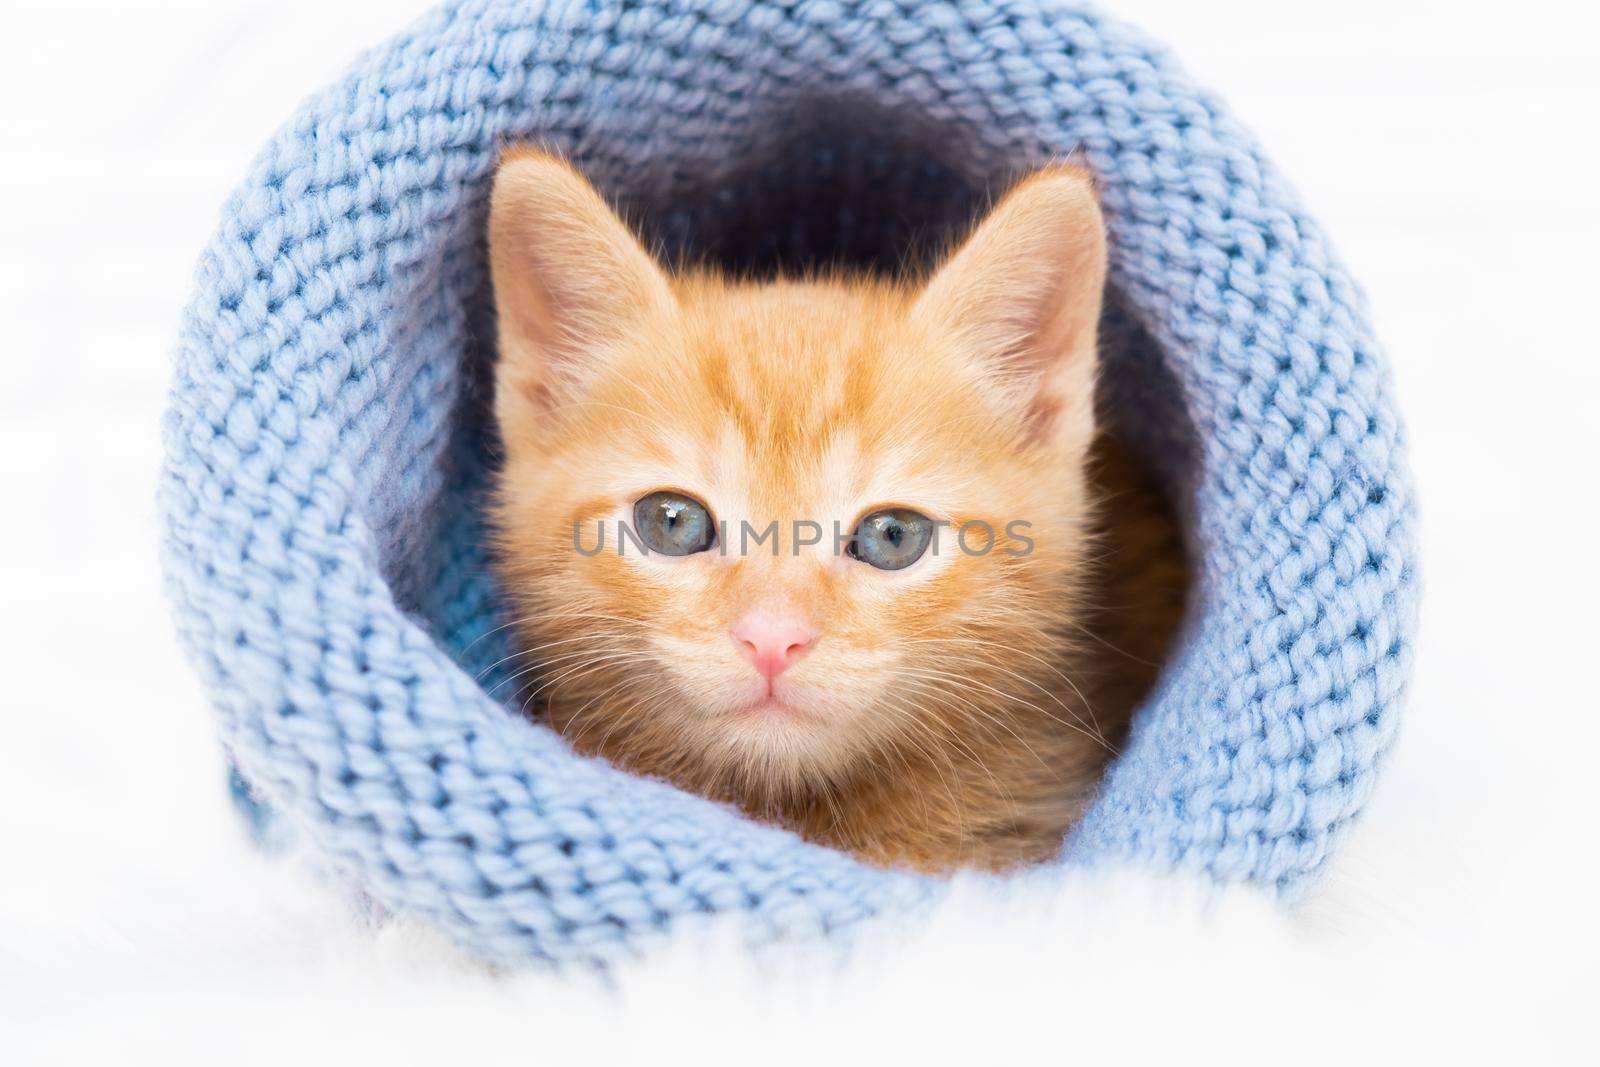 Small ginger tabby kitten is sweetly basking and looking at the camera in a knitted blue hat with copyspace. Soft and cozy. Christmas, home comfort and new year holidays, Valentines Day concept by chelmicky